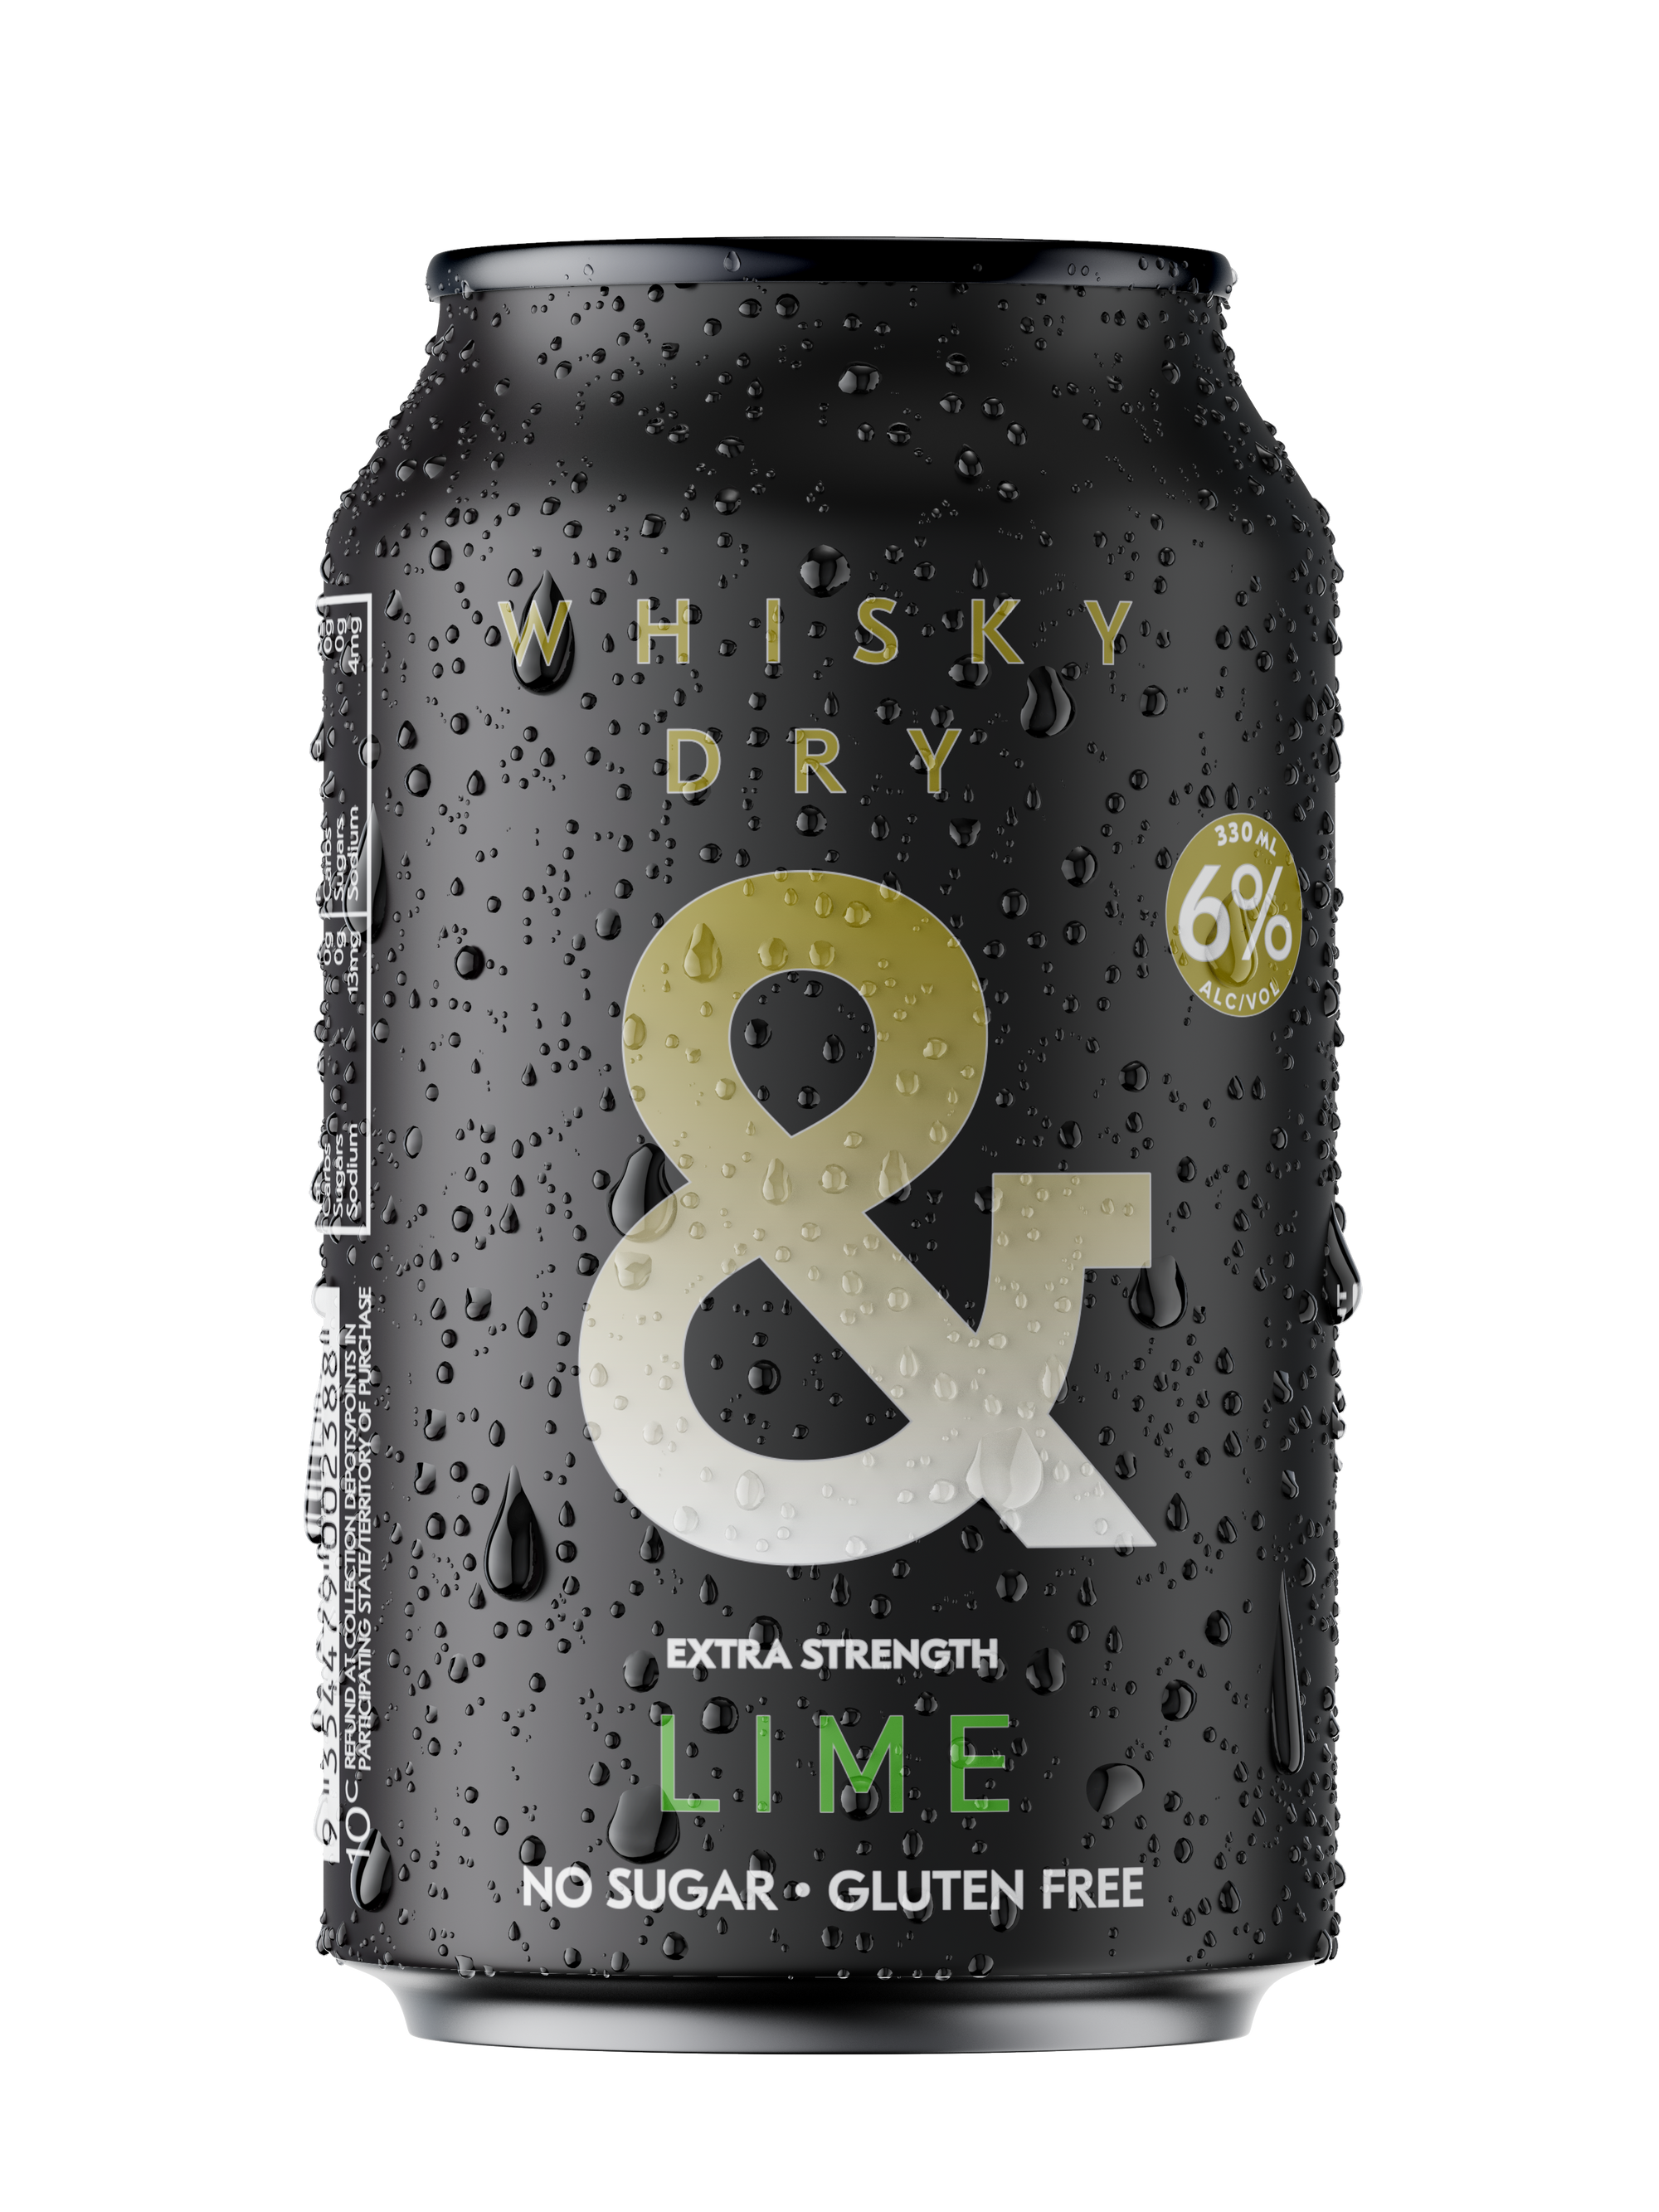 Whisky Dry & Lime Cans 6% (16 Pack)